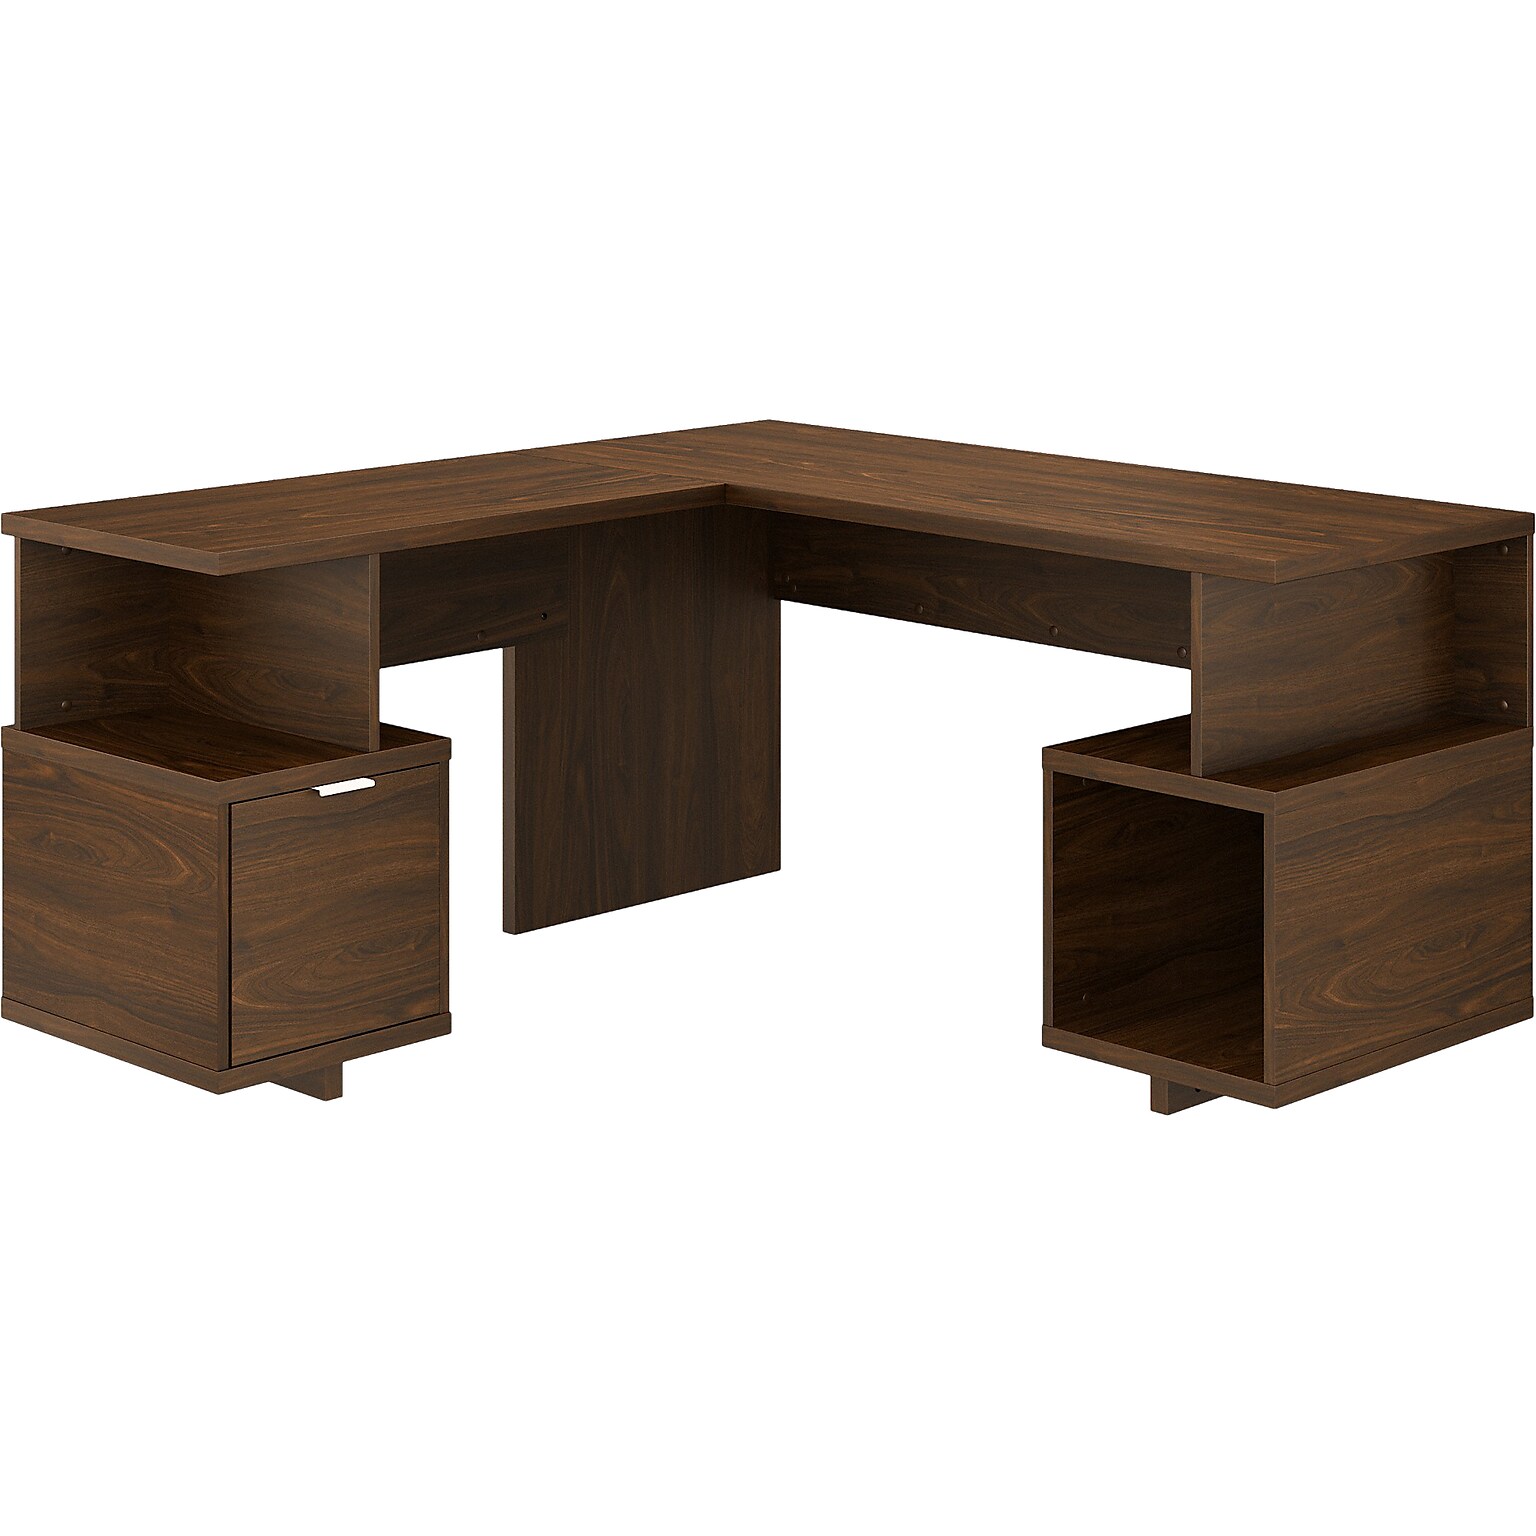 kathy ireland® Home by Bush Furniture Madison Avenue 60 L-Shaped Desk with Drawer and Storage, Modern Walnut (MDS001MW)